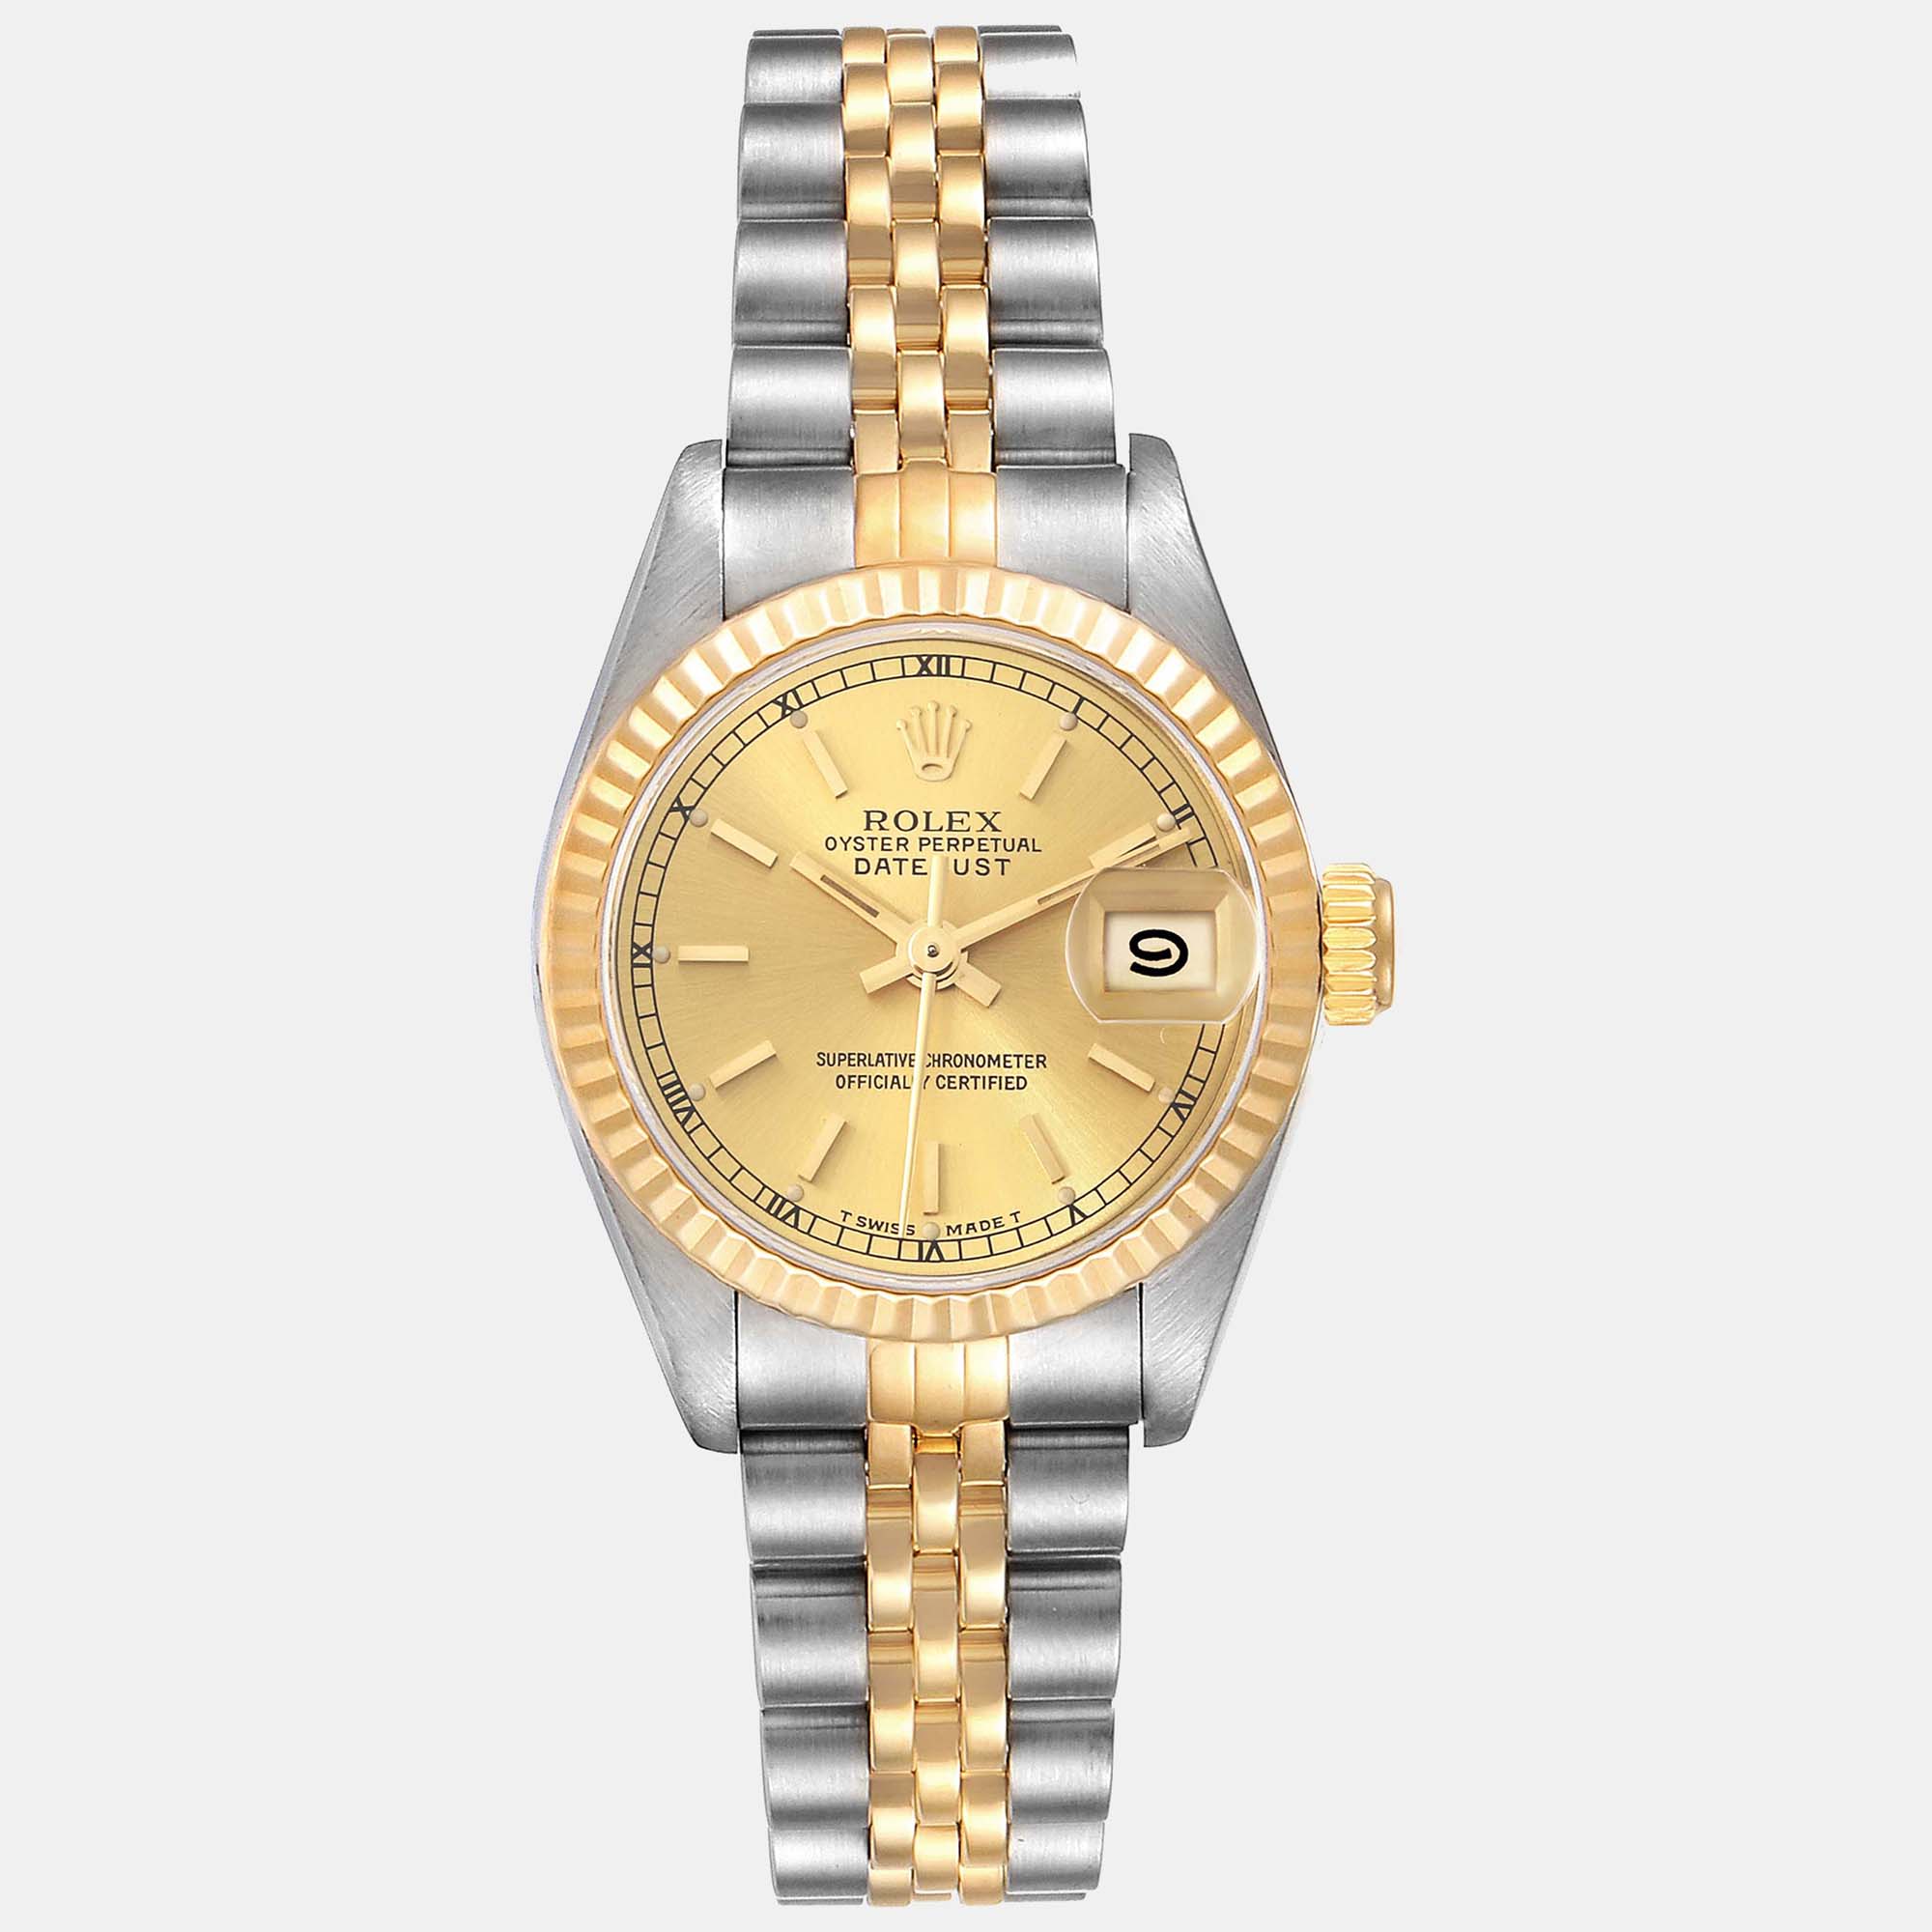 Rolex datejust champagne dial steel yellow gold ladies watch 26 mm